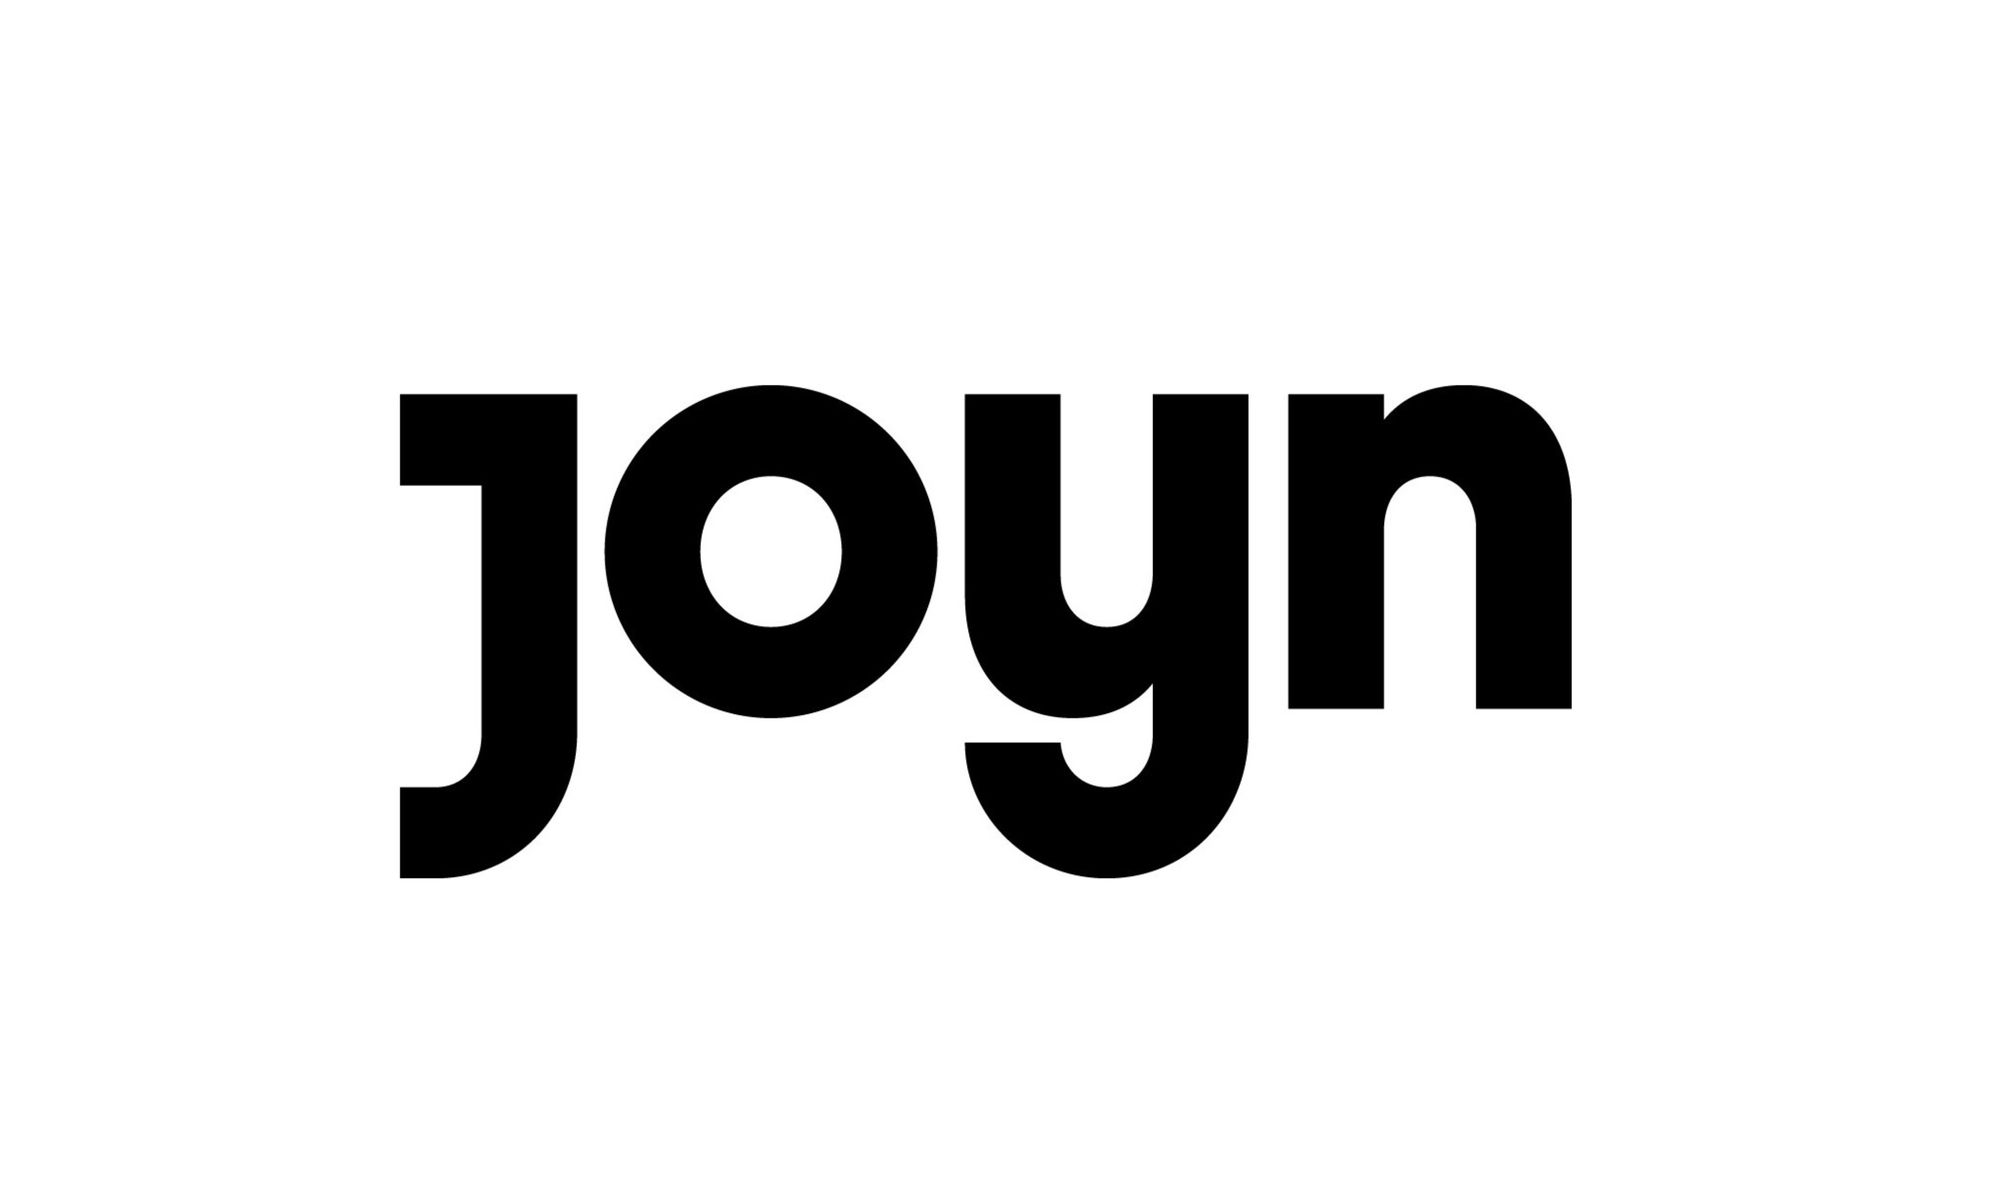 Joyn reaches 3.8 million monthly active users in Germany